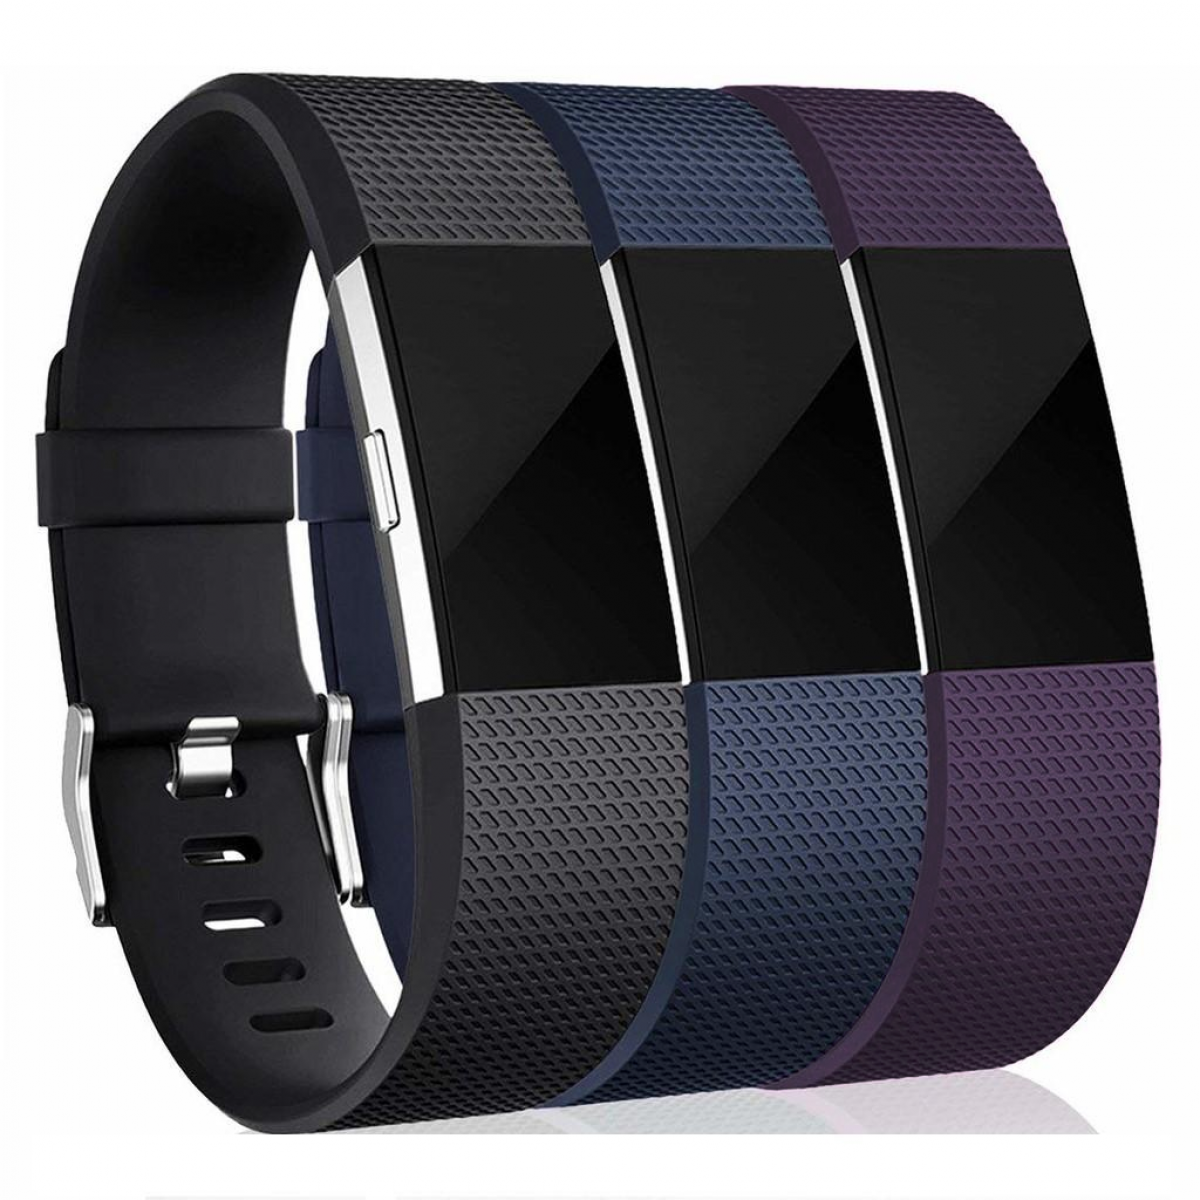 Charge Charge 3er-Pack 2 Armband 2 (S), Ersatzband, INF (S), Fitbit 2, Fitbit Schwarz 3er-Pack Charge schwarz/blau/lila Fitbit Armband